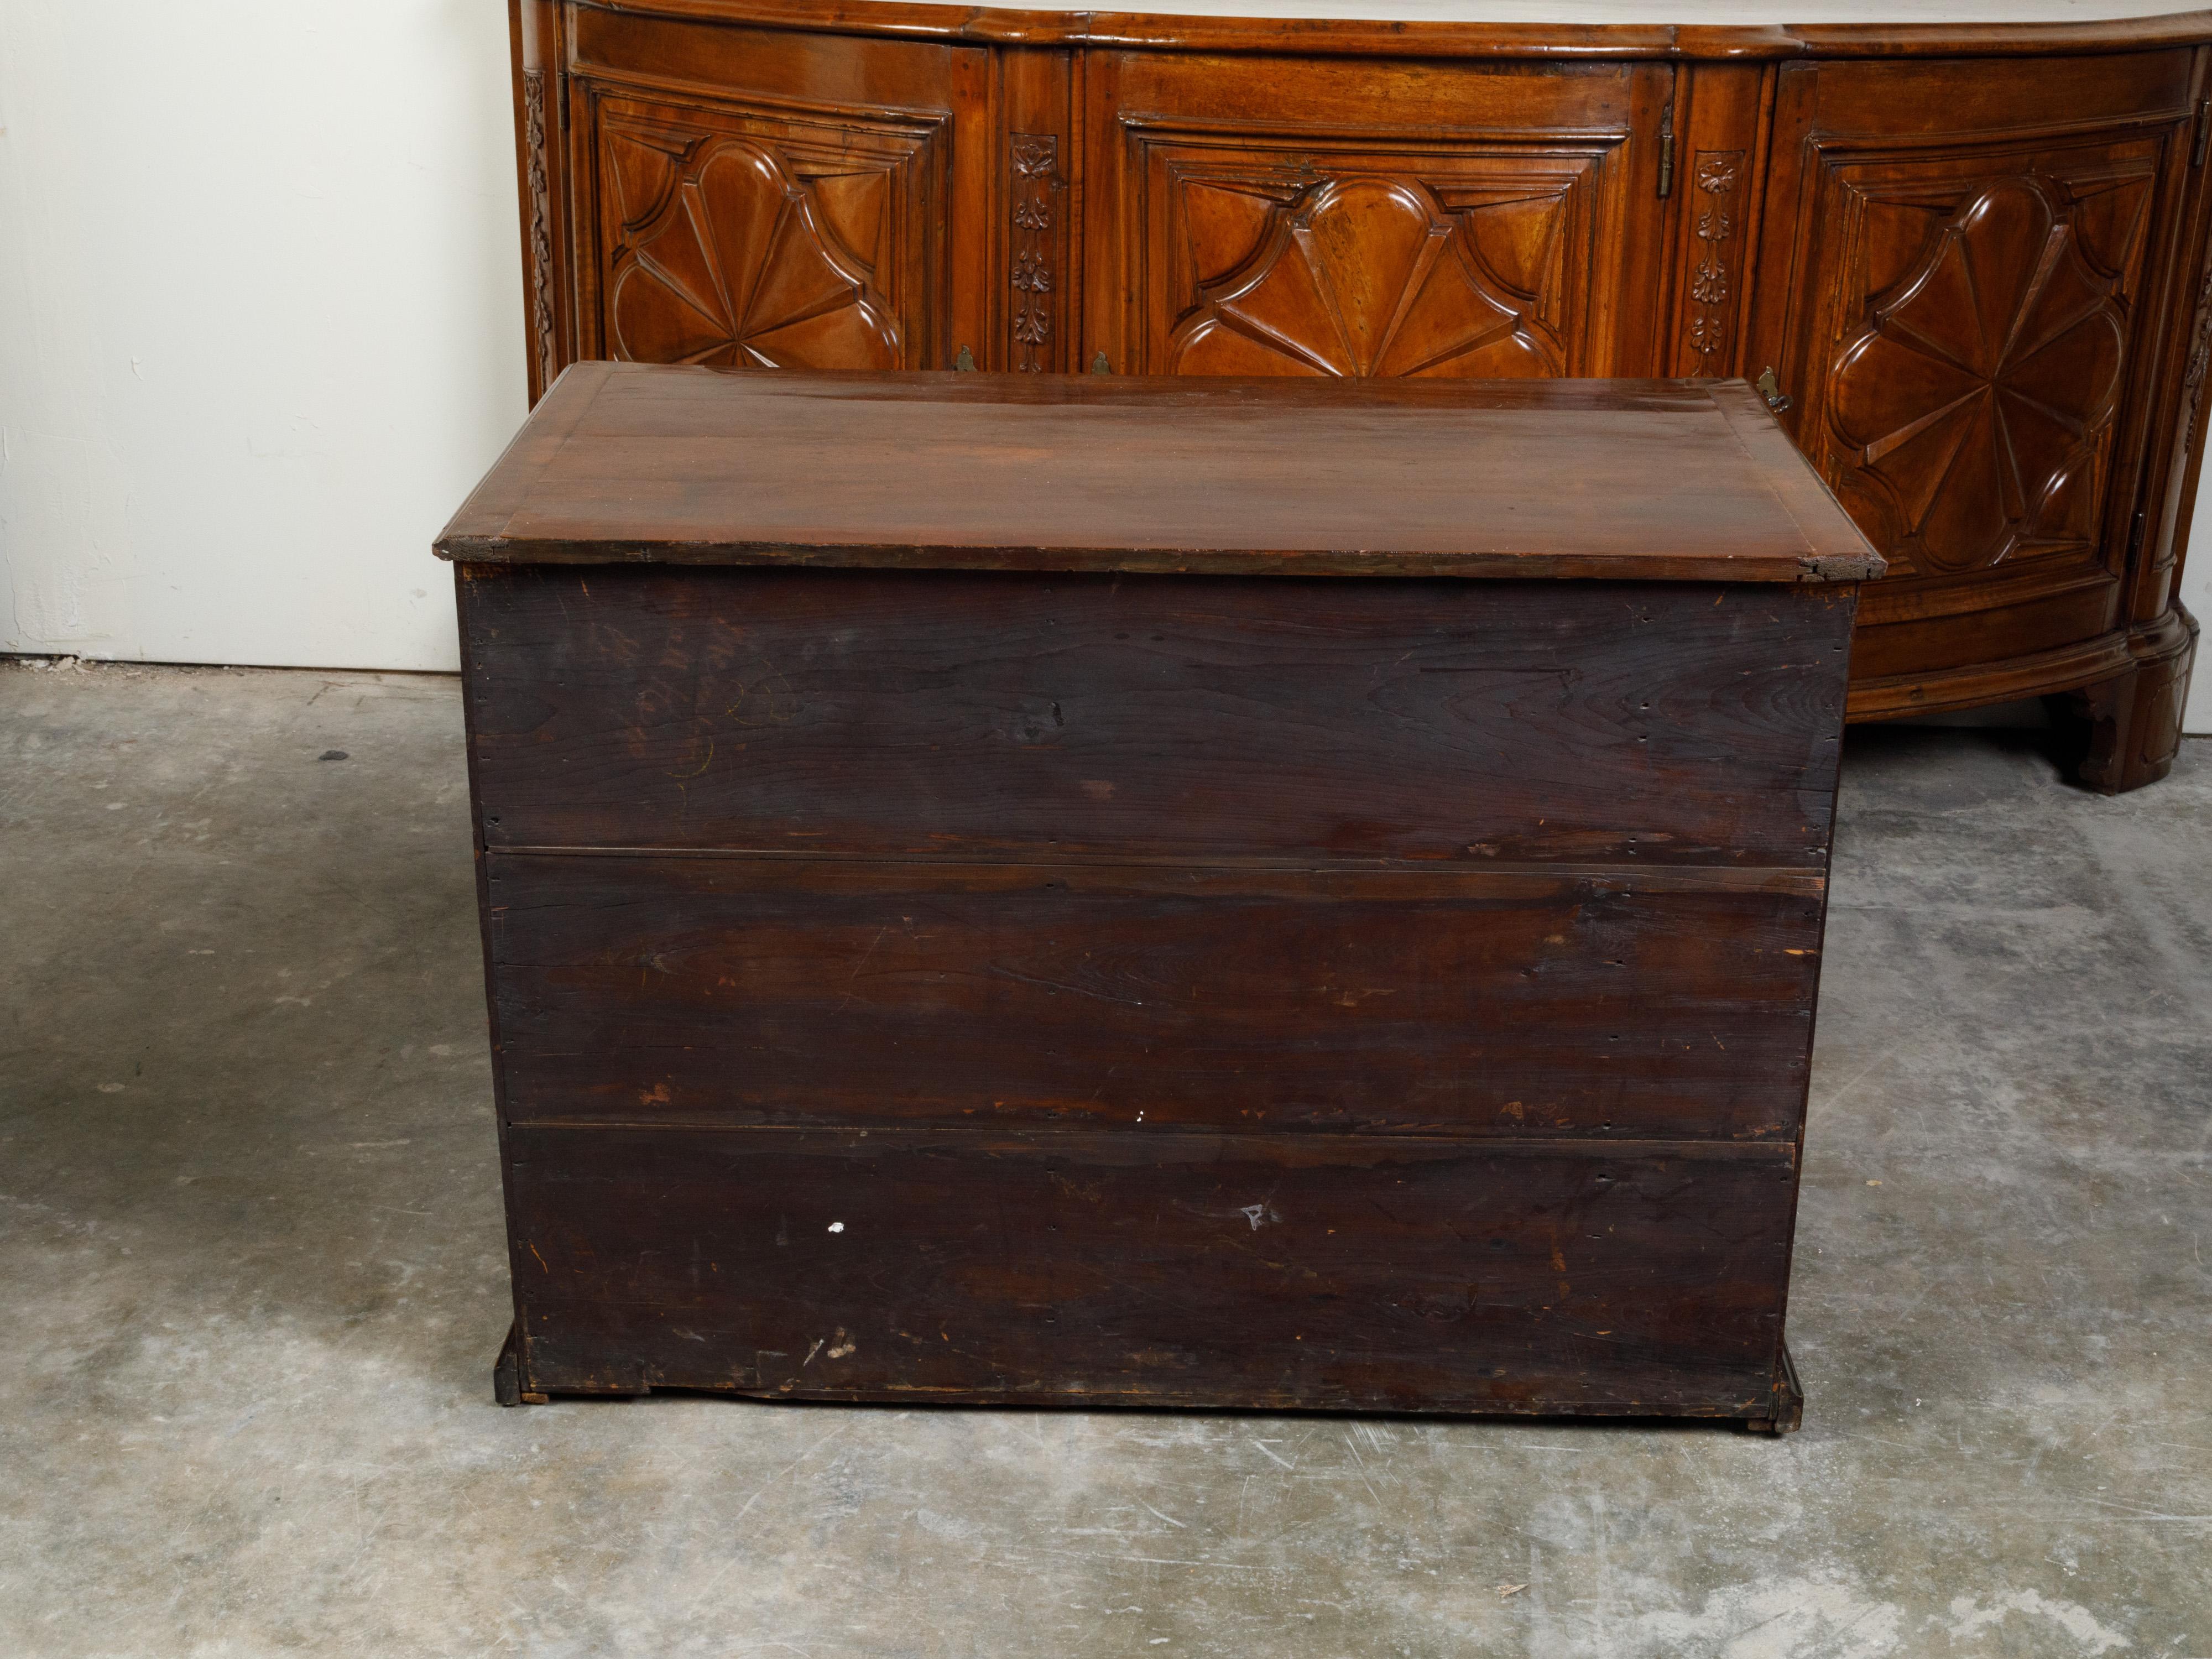 Brass English Georgian Period Mahogany Desk with Ten Graduating Drawers and Shelf For Sale